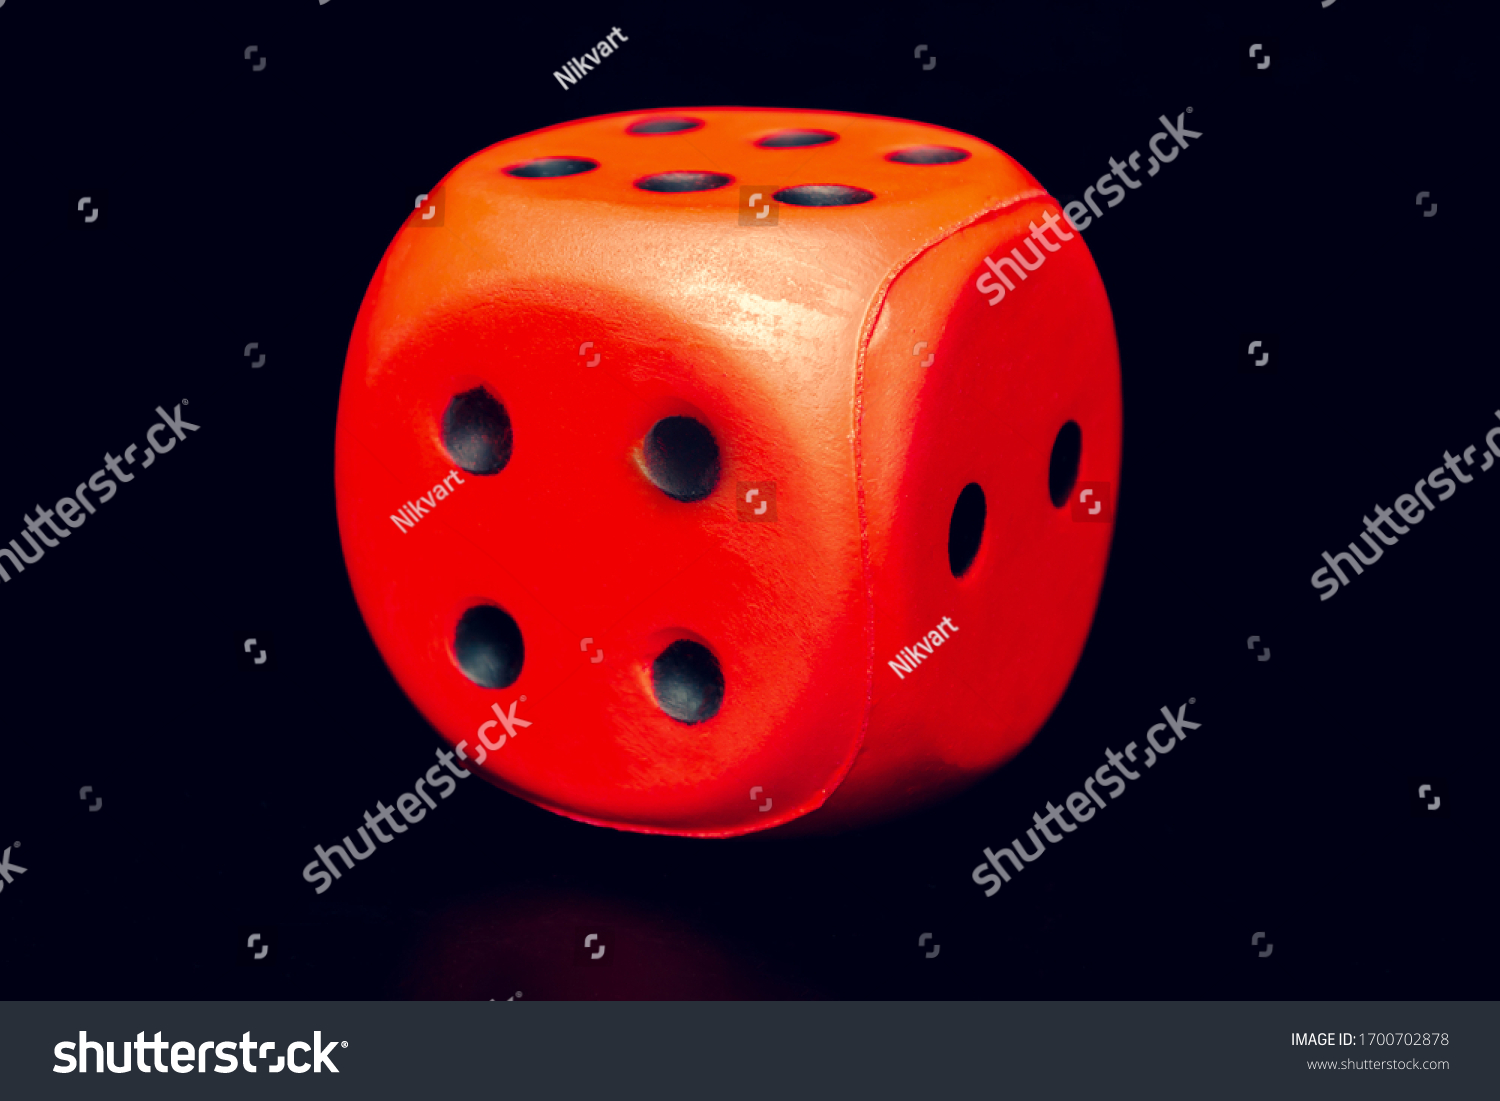 Big dice of red color on a black background #1700702878